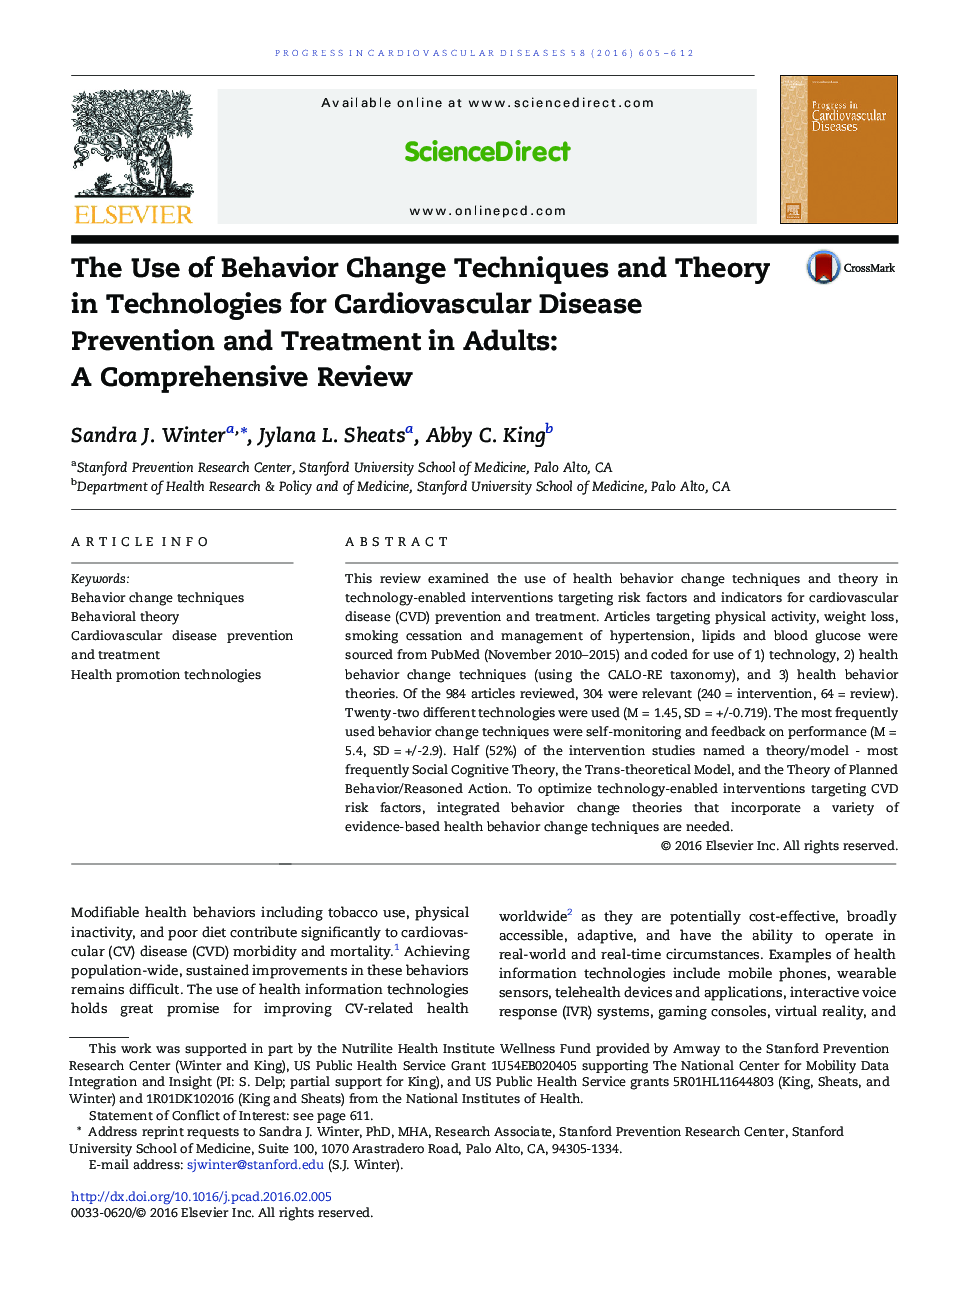 The Use of Behavior Change Techniques and Theory in Technologies for Cardiovascular Disease Prevention and Treatment in Adults: A Comprehensive Review 